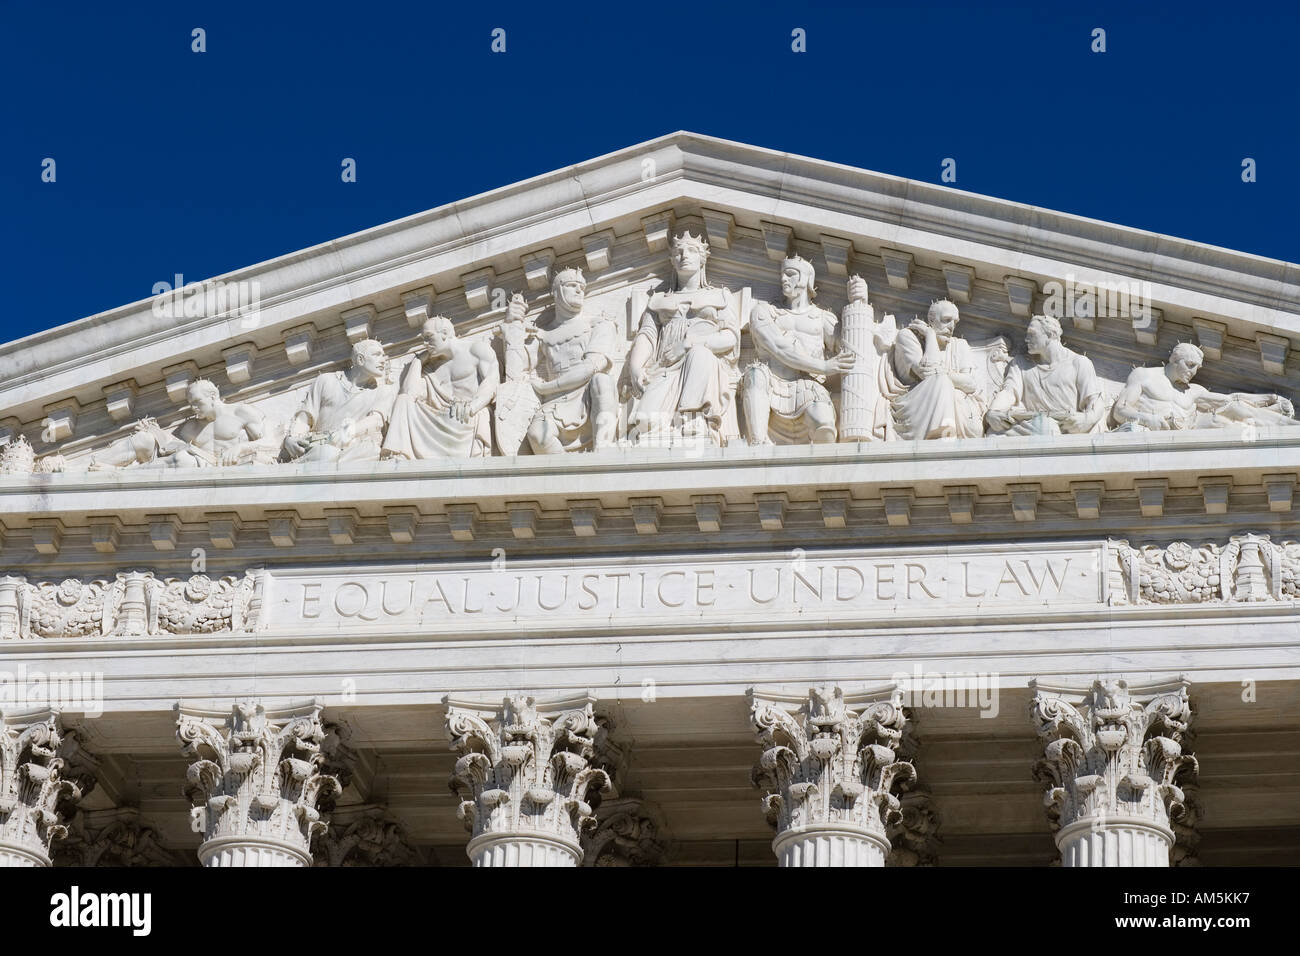 Main Frieze Of The Us Supreme Court Building Washington Dc On The Architrave The Famous Words